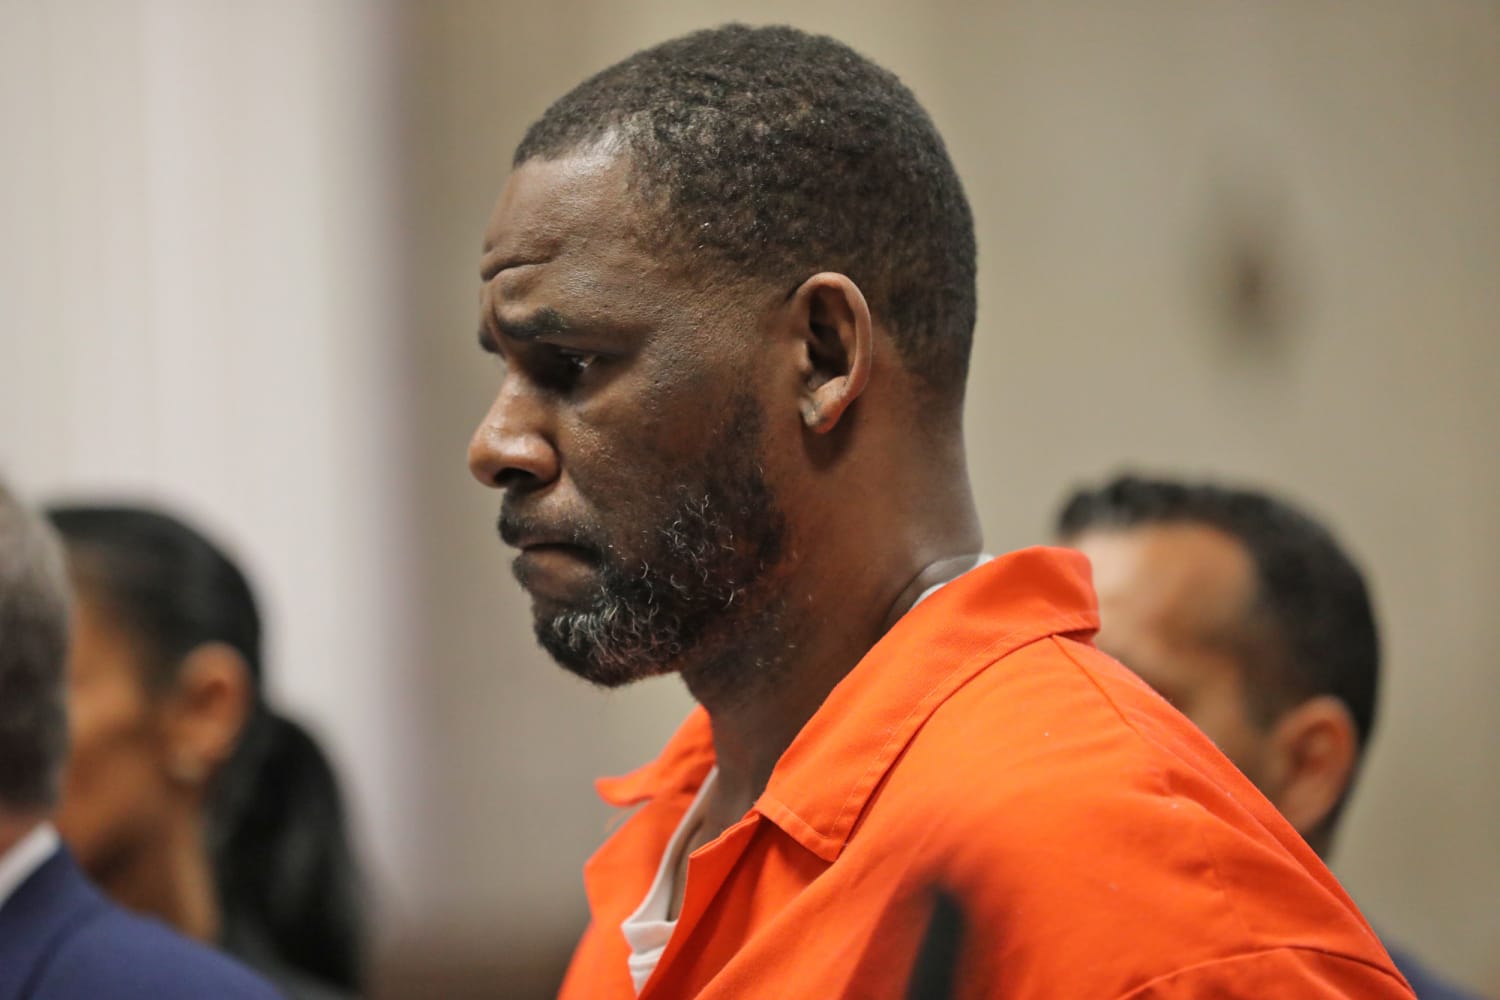 U.S. prosecutors ask for 25 more years in prison for R. Kelly